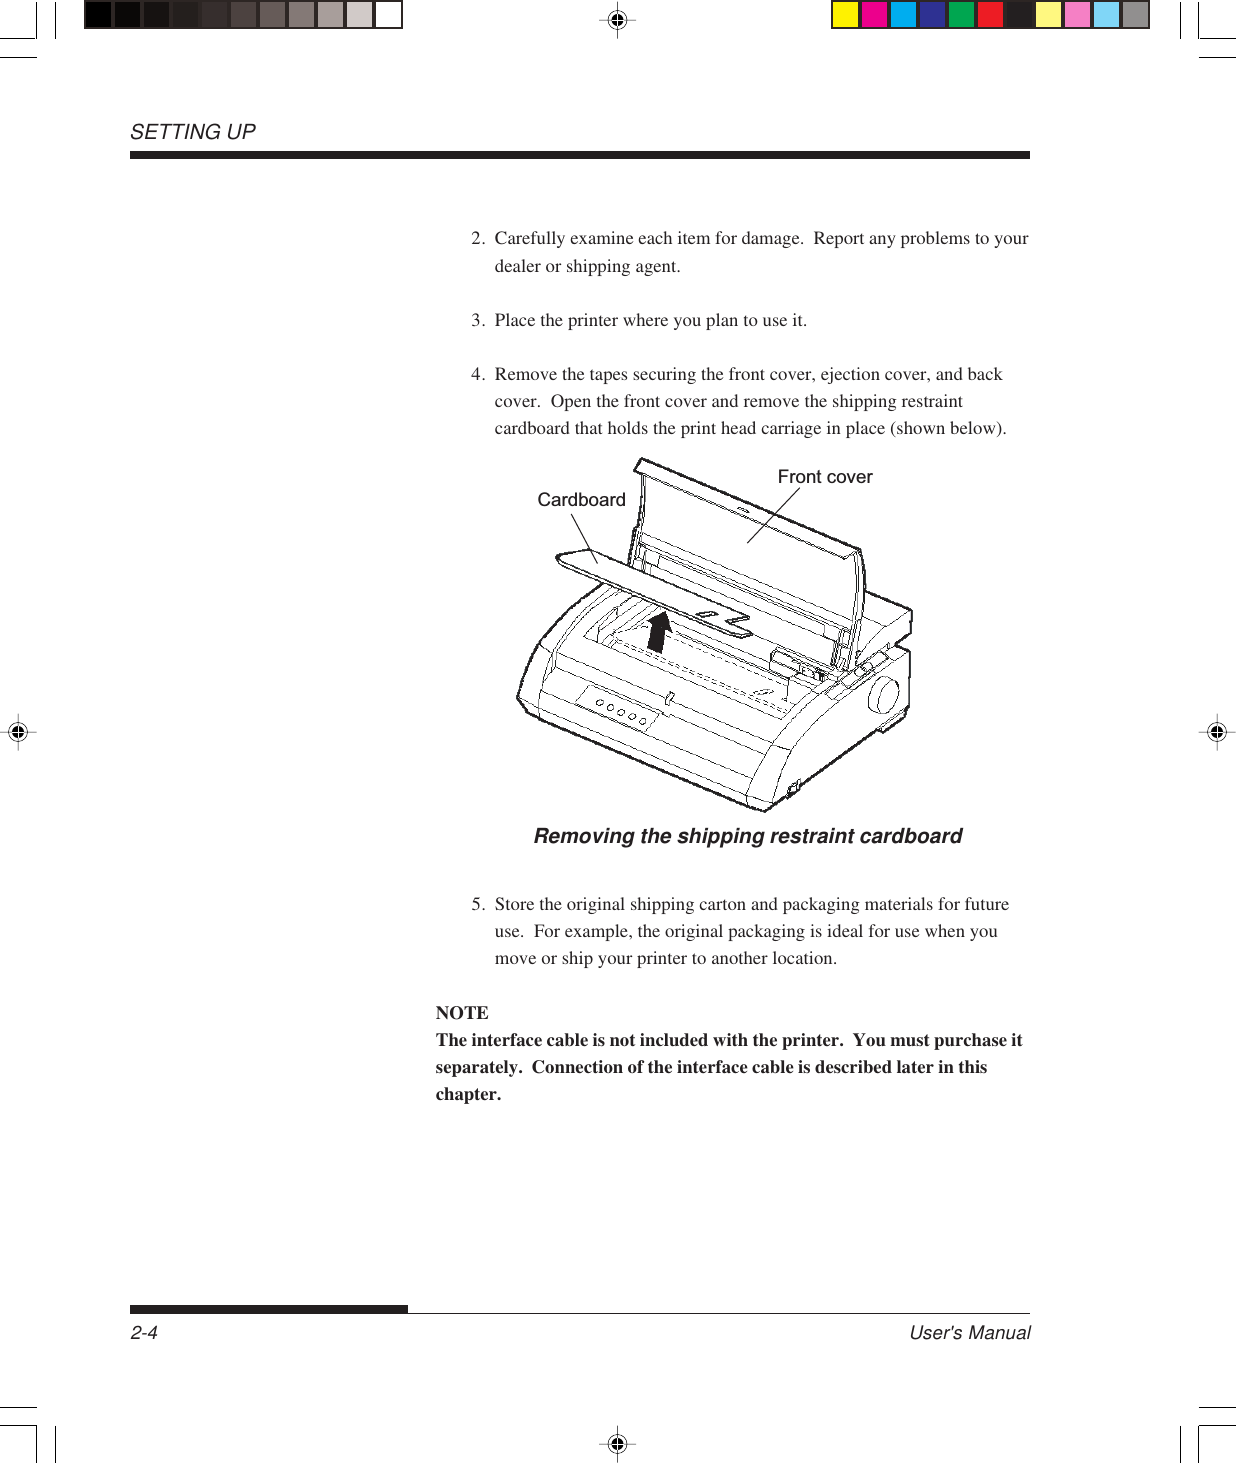 SETTING UP2-4 User&apos;s Manual2. Carefully examine each item for damage.  Report any problems to yourdealer or shipping agent.3. Place the printer where you plan to use it.4. Remove the tapes securing the front cover, ejection cover, and backcover.  Open the front cover and remove the shipping restraintcardboard that holds the print head carriage in place (shown below).Removing the shipping restraint cardboardFront coverCardboard5. Store the original shipping carton and packaging materials for futureuse.  For example, the original packaging is ideal for use when youmove or ship your printer to another location.NOTEThe interface cable is not included with the printer.  You must purchase itseparately.  Connection of the interface cable is described later in thischapter.